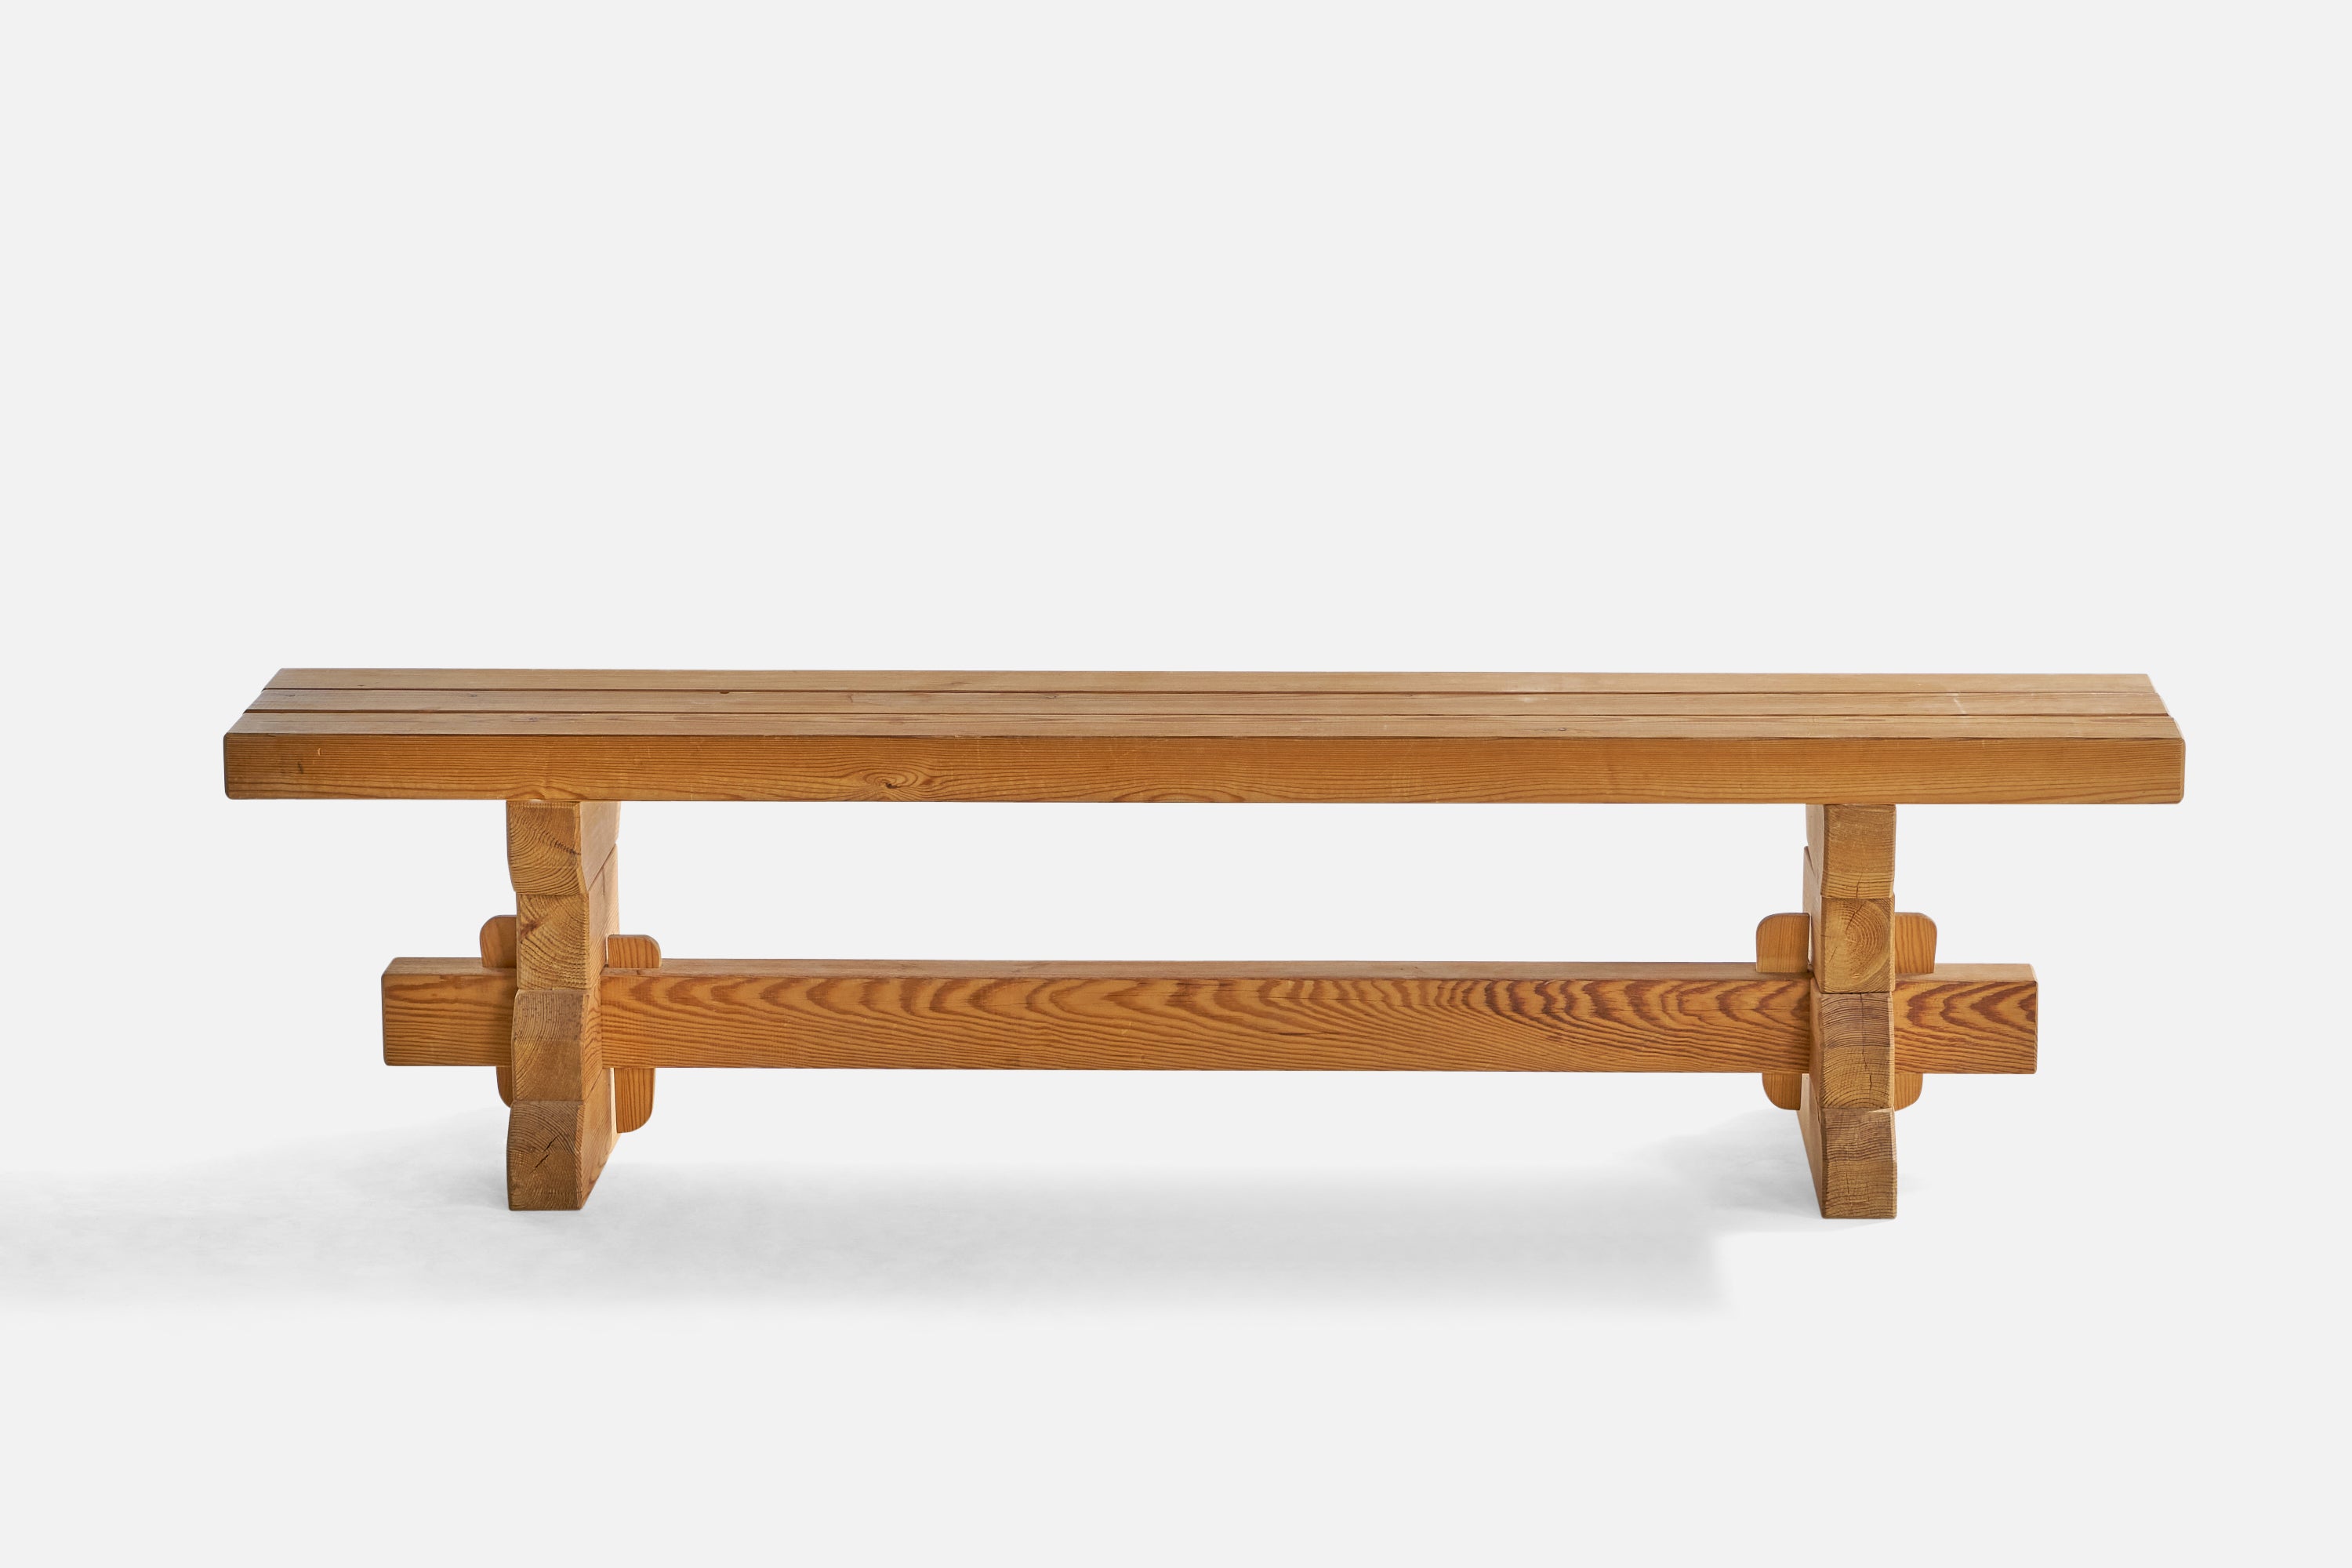 A pine bench designed and produced in Sweden, c. 1970s.

Seat height: 17.3”